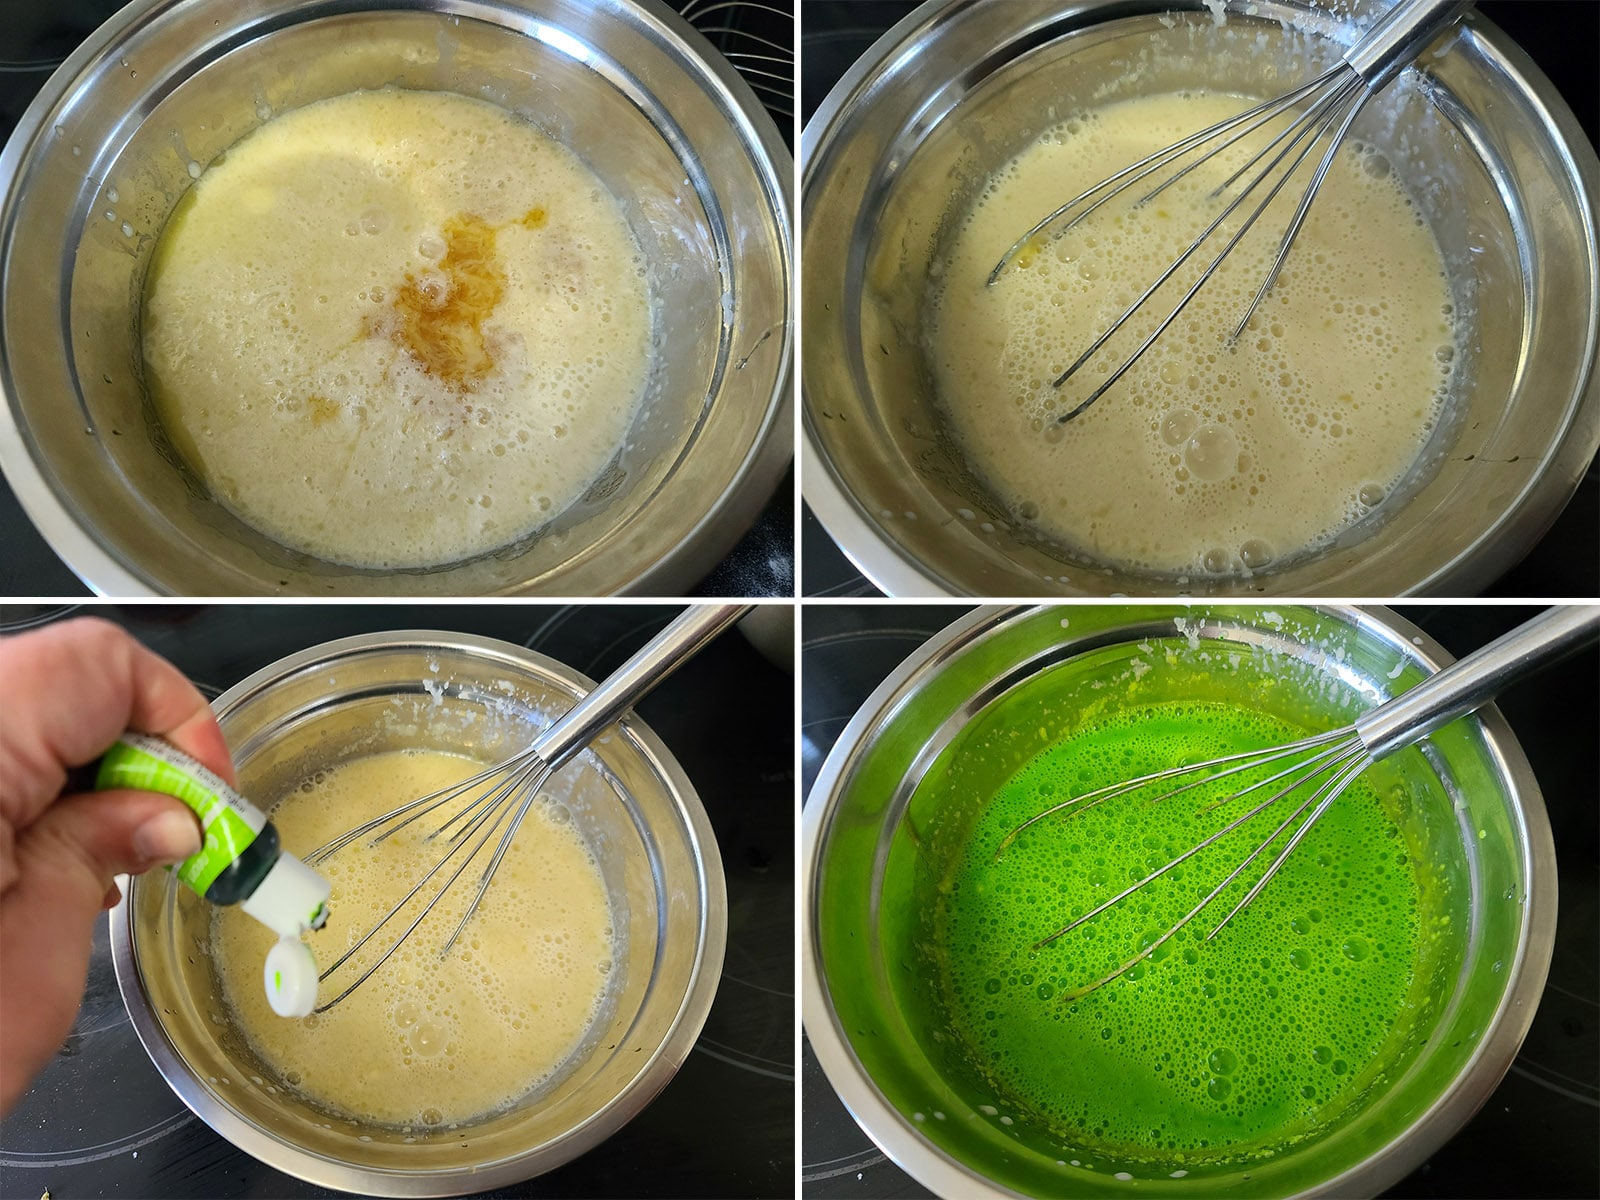 A 4 part image showing the wet ingredients being mixed and dyed bright neon green.